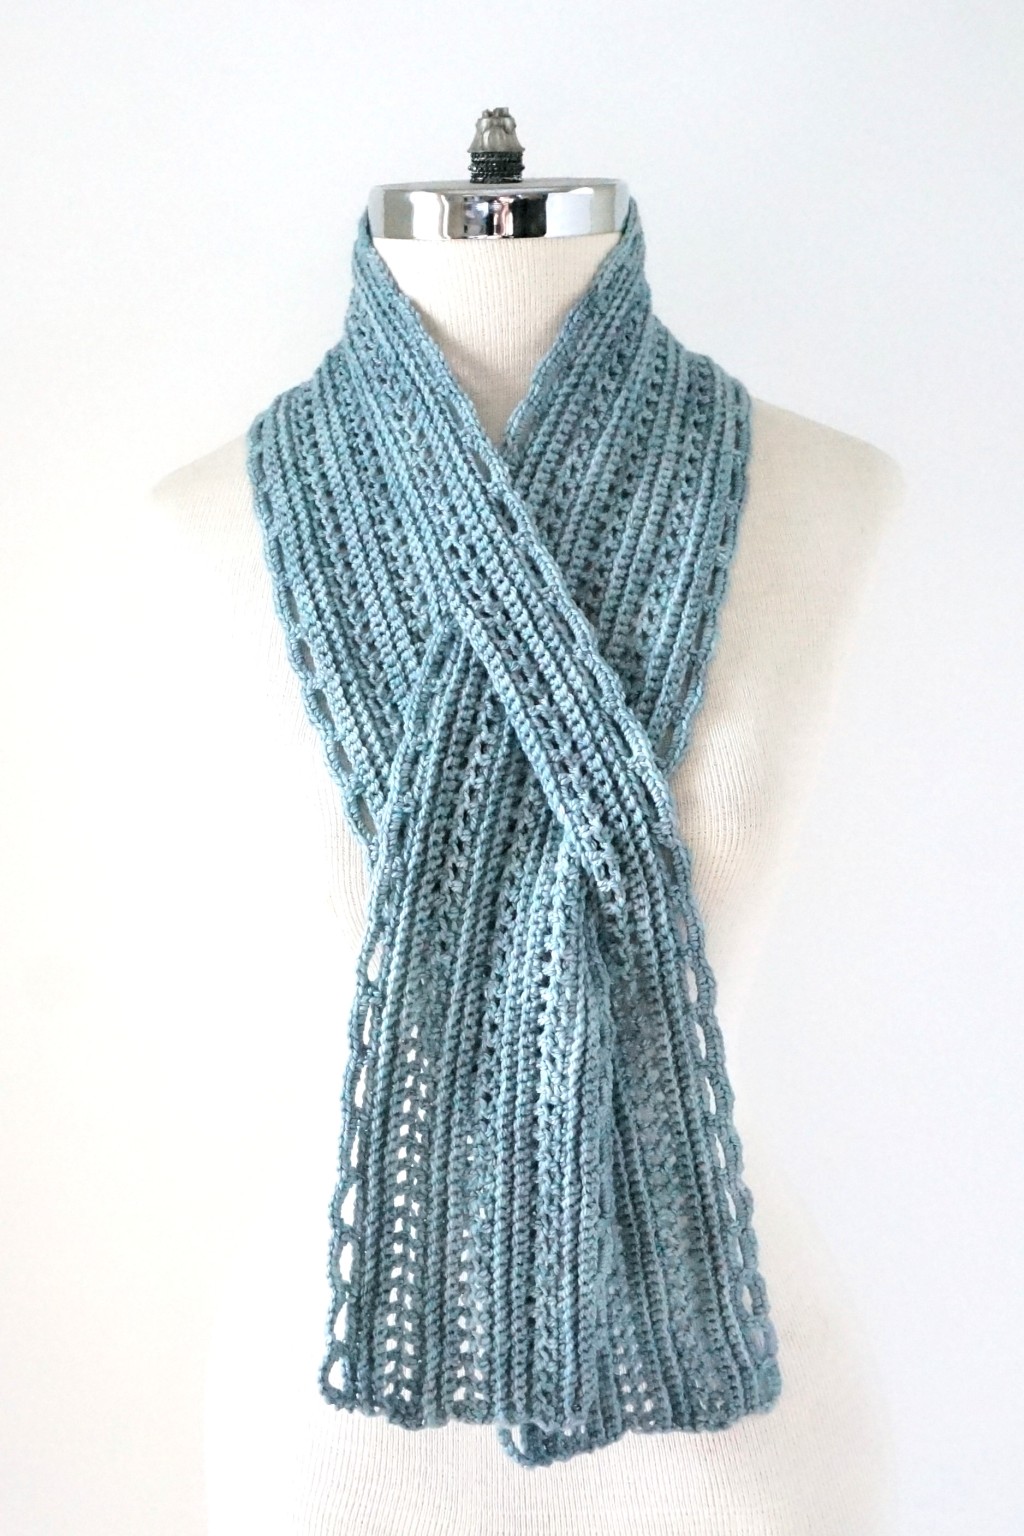 New Crochet Pattern:  The Elegant Essence Lace Scarf has a slit crocheted into the scarf to fasten without the bulk.